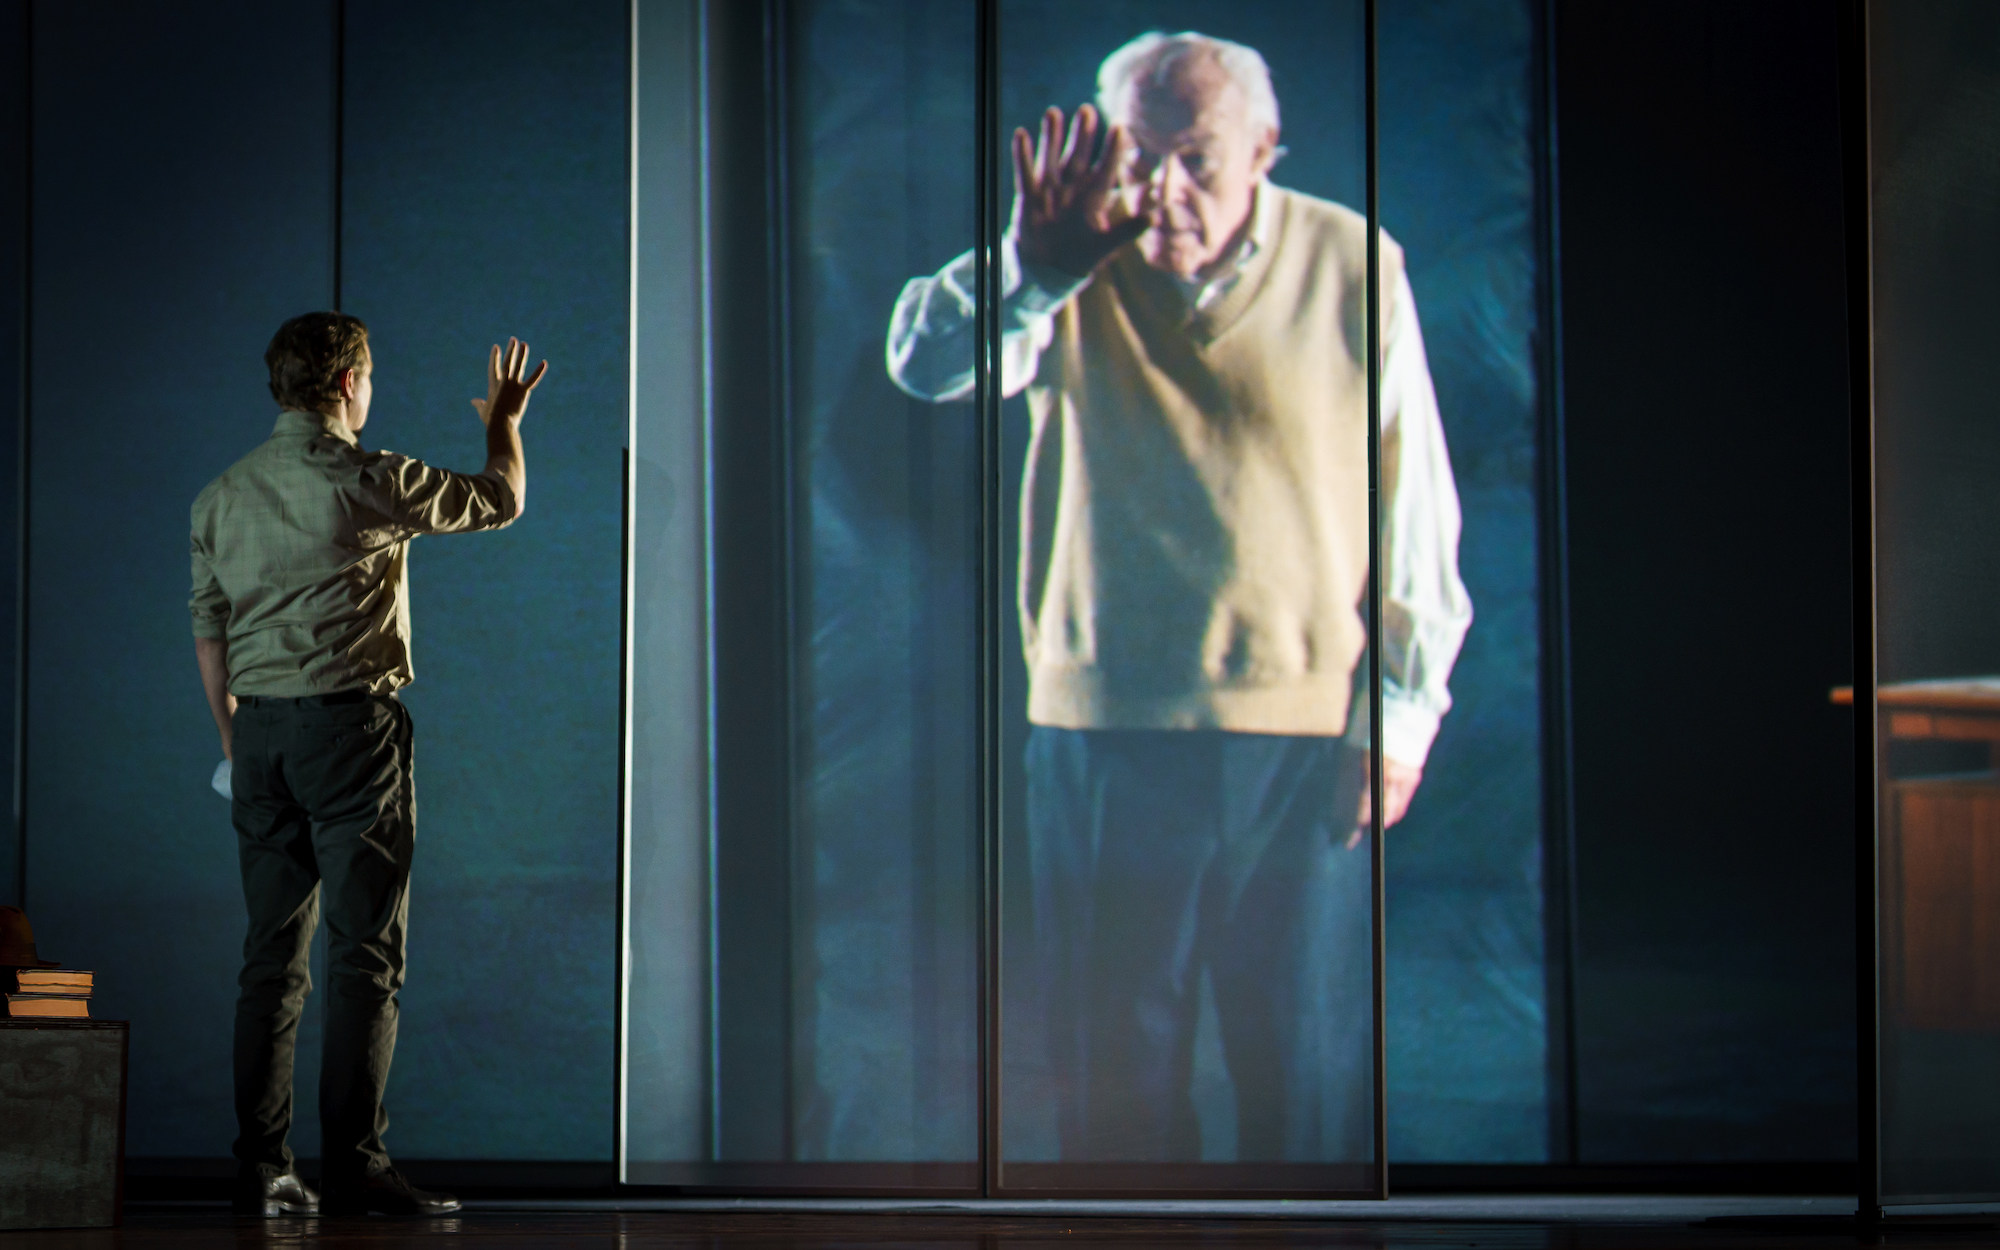 A scene from “The Book of Water” featuring Samuel West (live on stage) and his father, Timothy West (in a pre-recorded video), a polished multimedia spectacle about natural disaster and personal renewal performed in Hong Kong as part of the Hong Kong Arts Festival. Photo:  Michel Schnater 